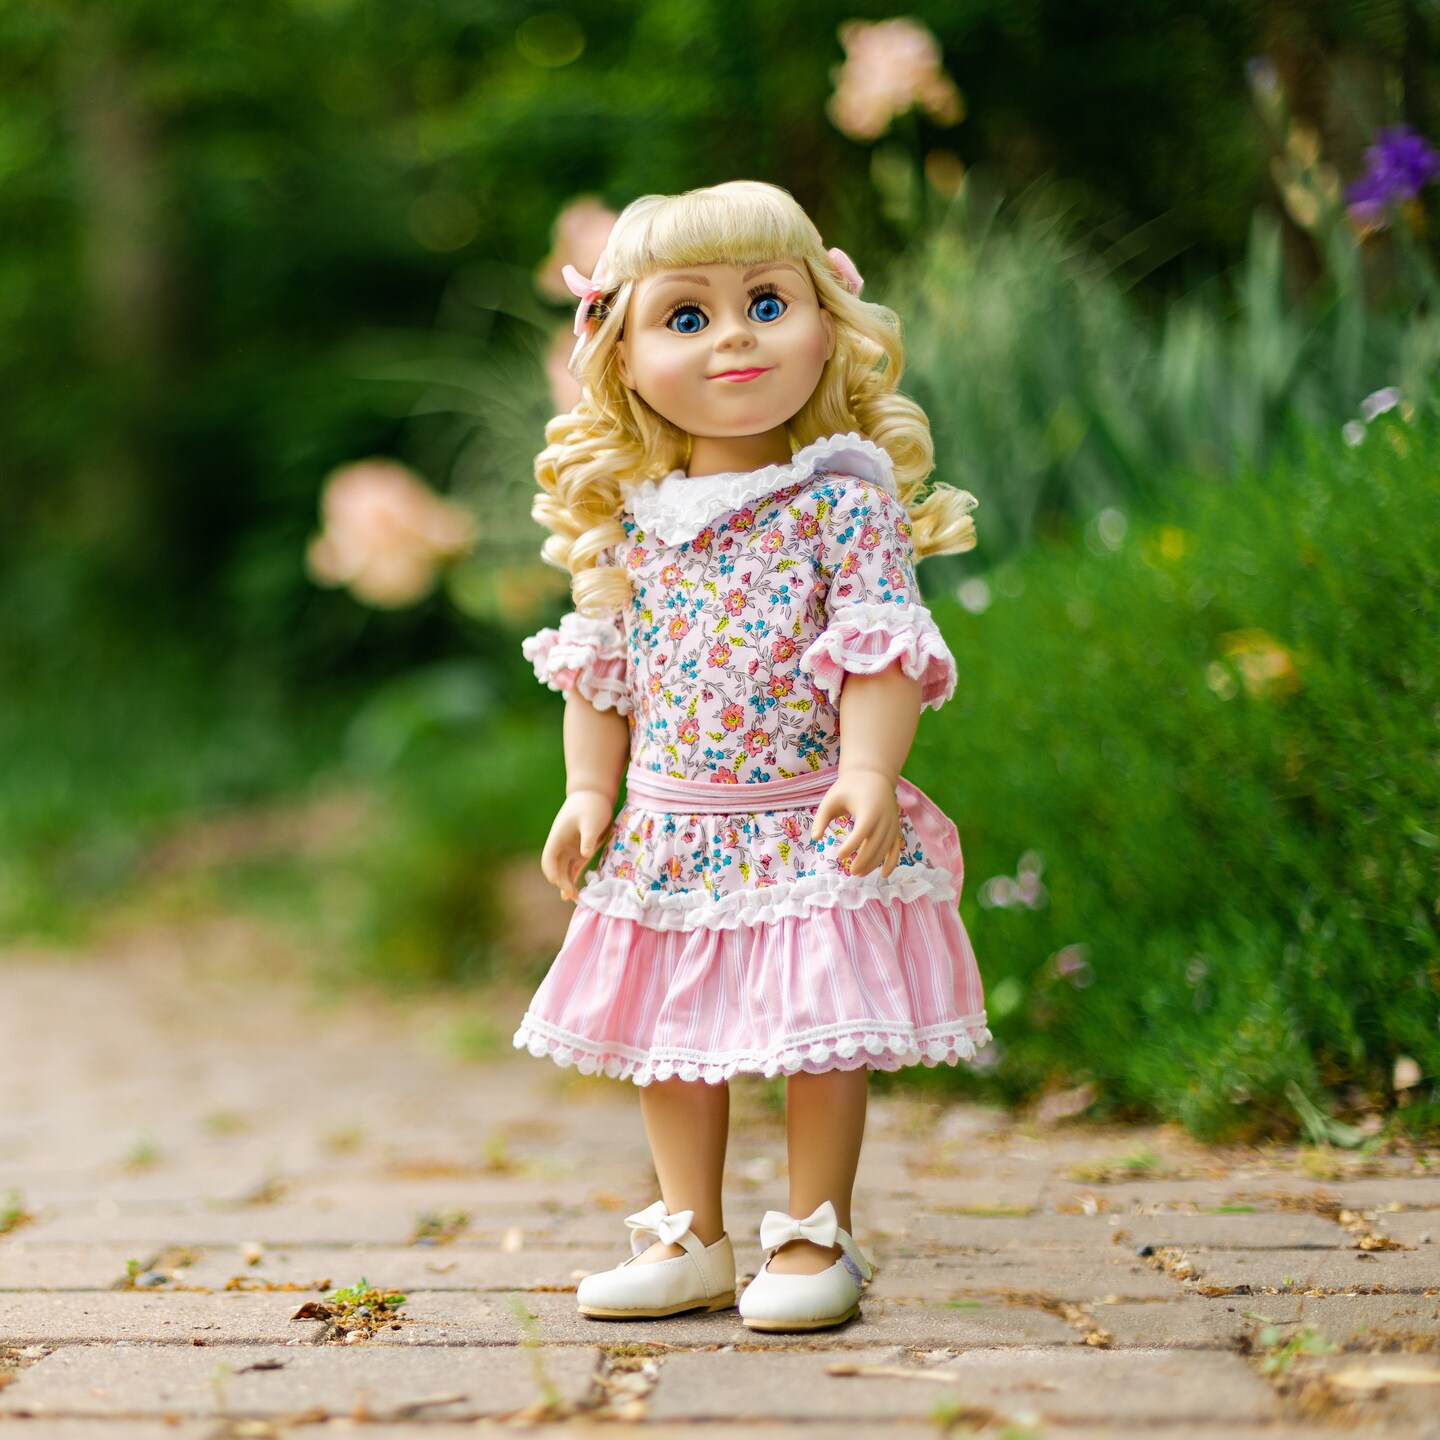 The Queen&#x27;s Treasures 18 Inch Doll Clothes 4 Piece Pink Floral Dress